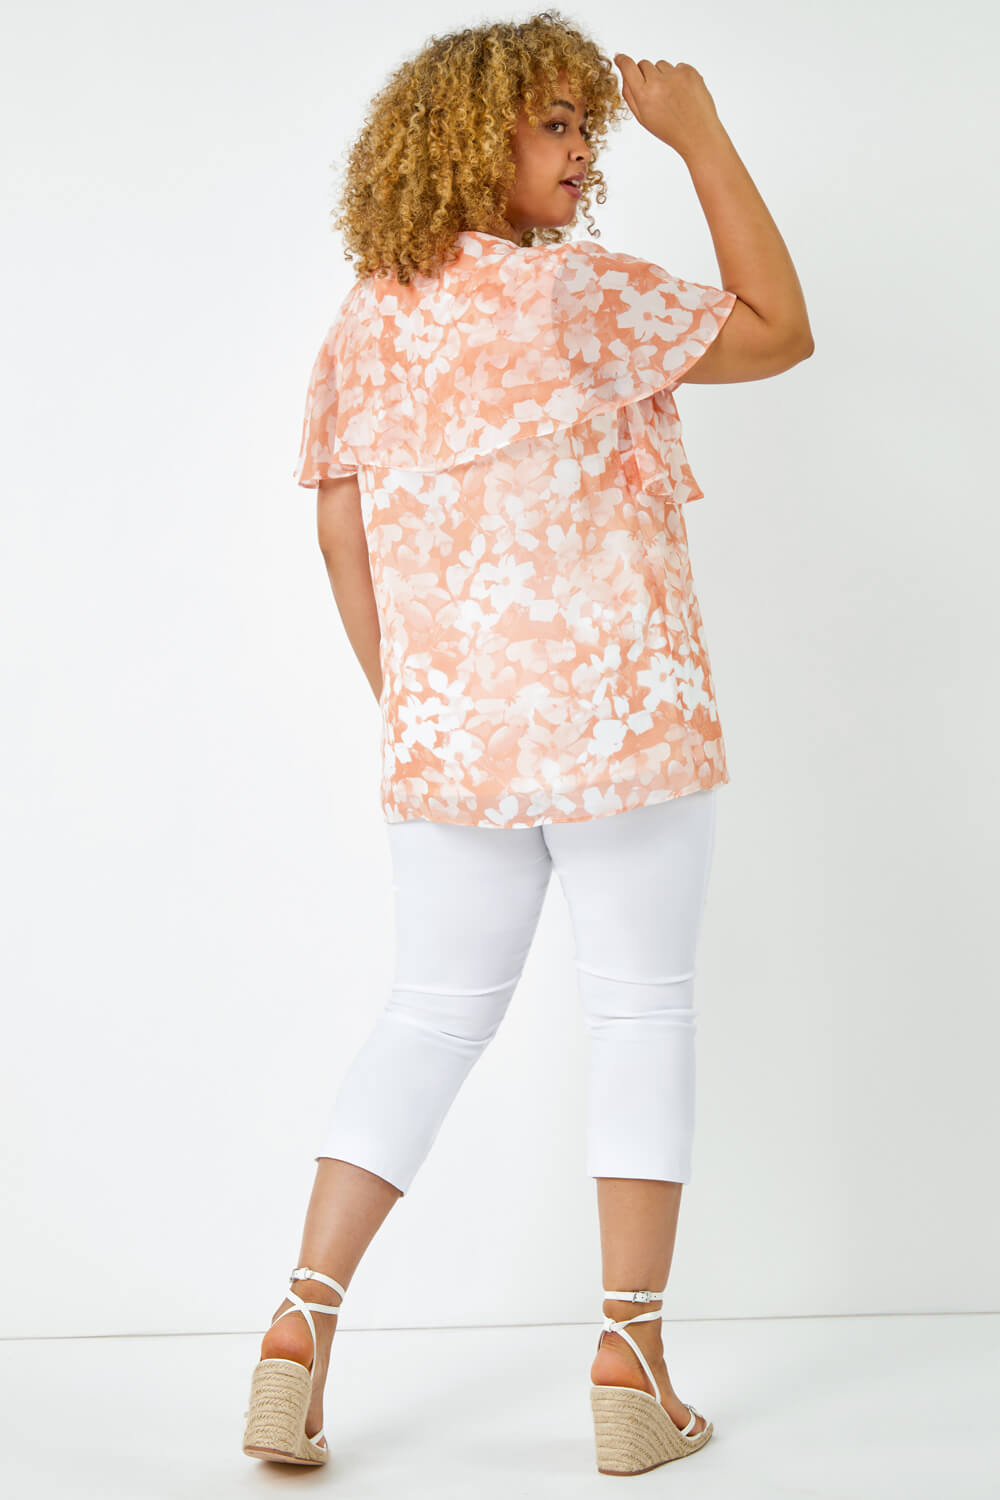 CORAL Curve Floral Chiffon Overlay Top, Image 3 of 5